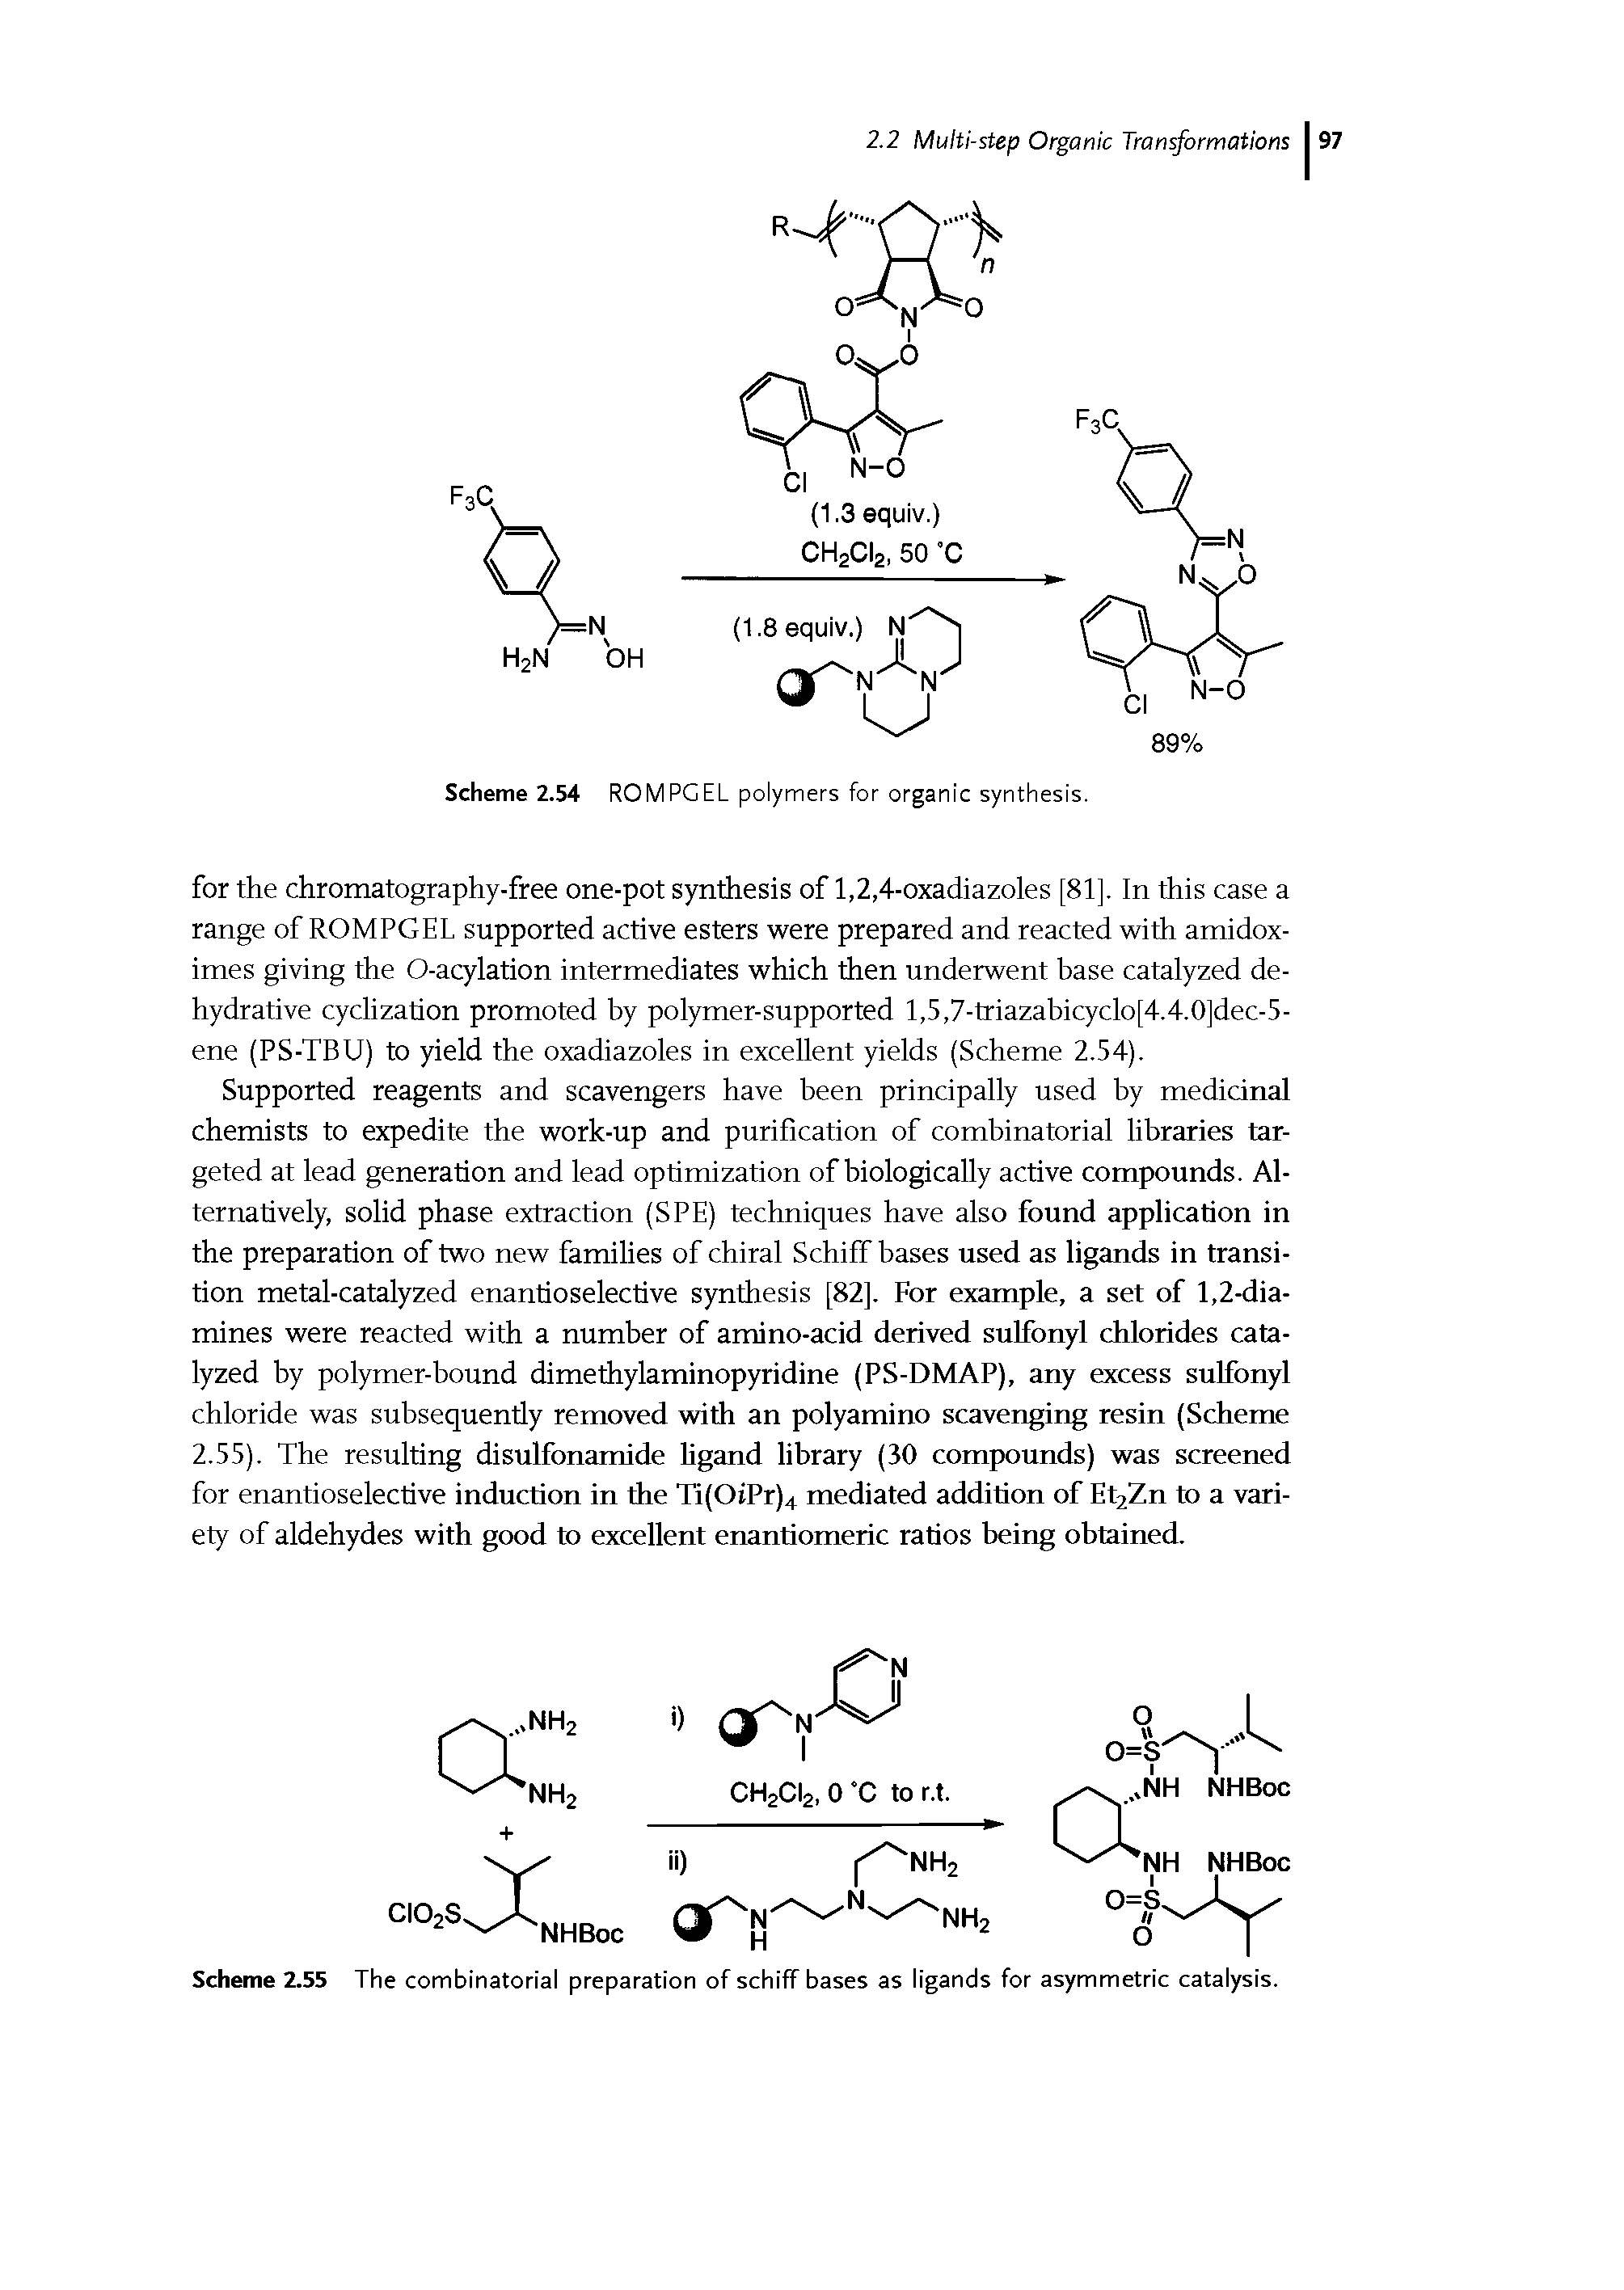 Scheme 2.55 The combinatorial preparation of schiff bases as ligands for asymmetric catalysis.